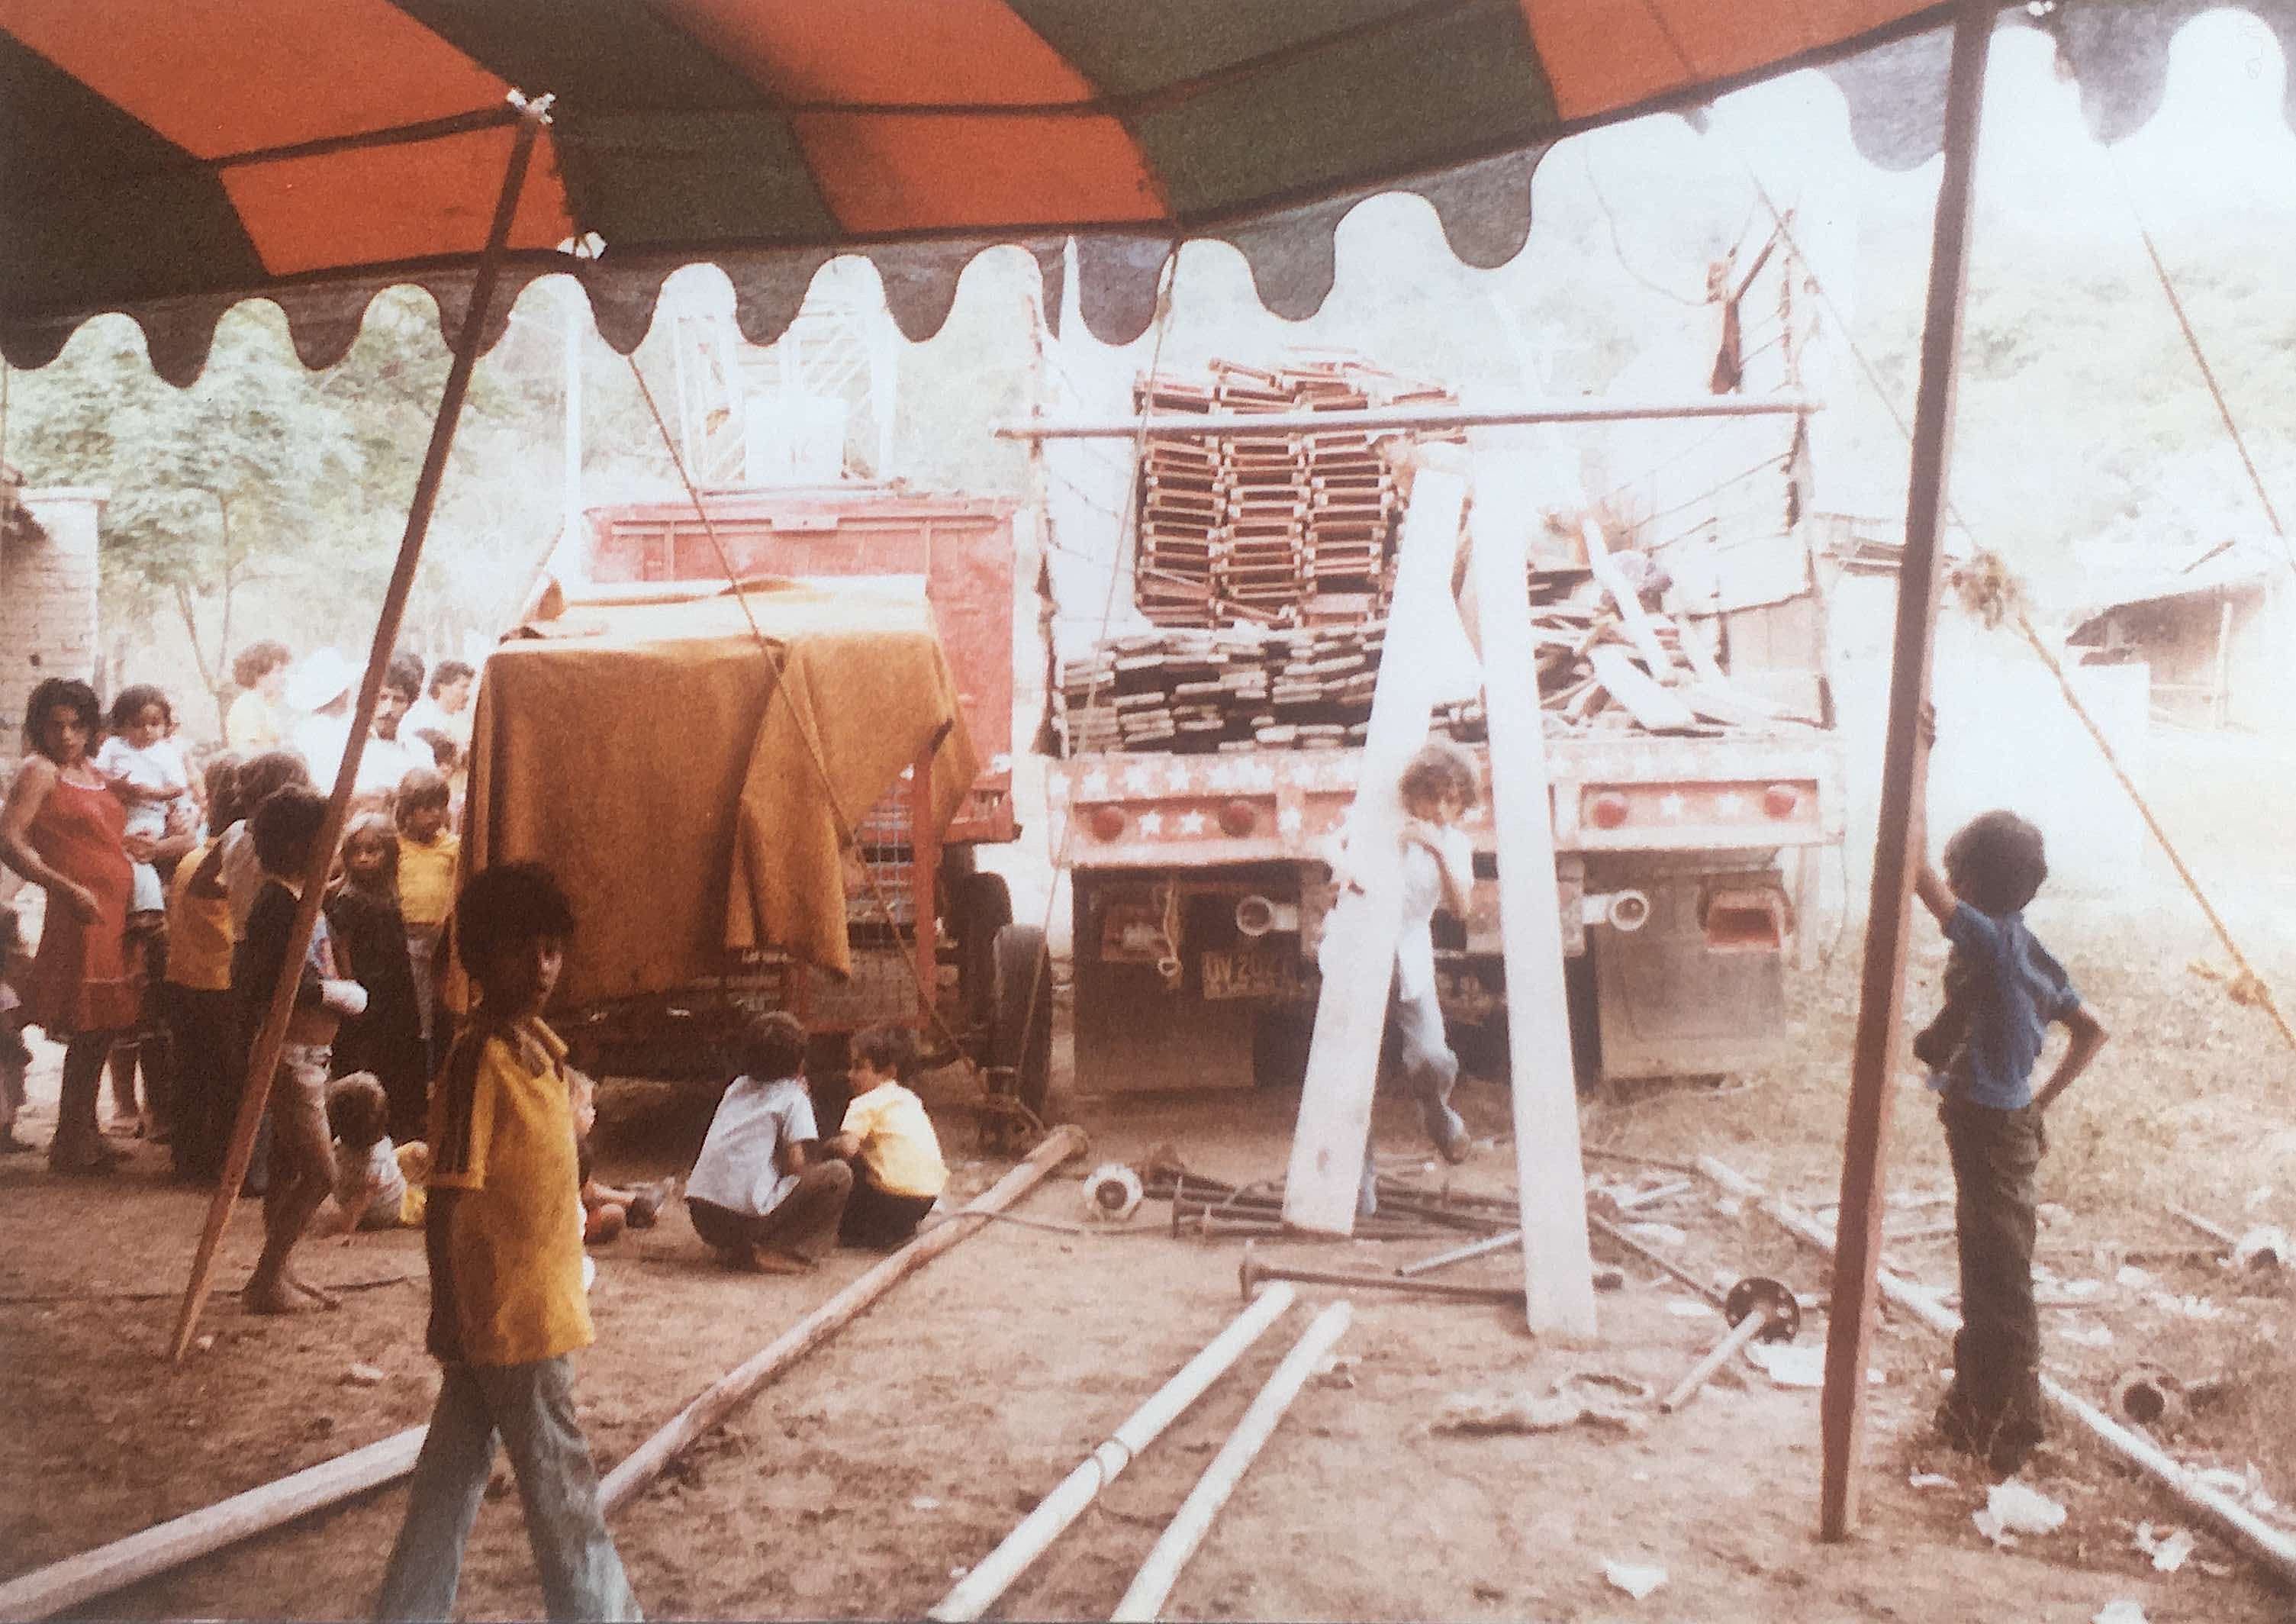 Carrying and assembling the seating into circus tent. Mexico.